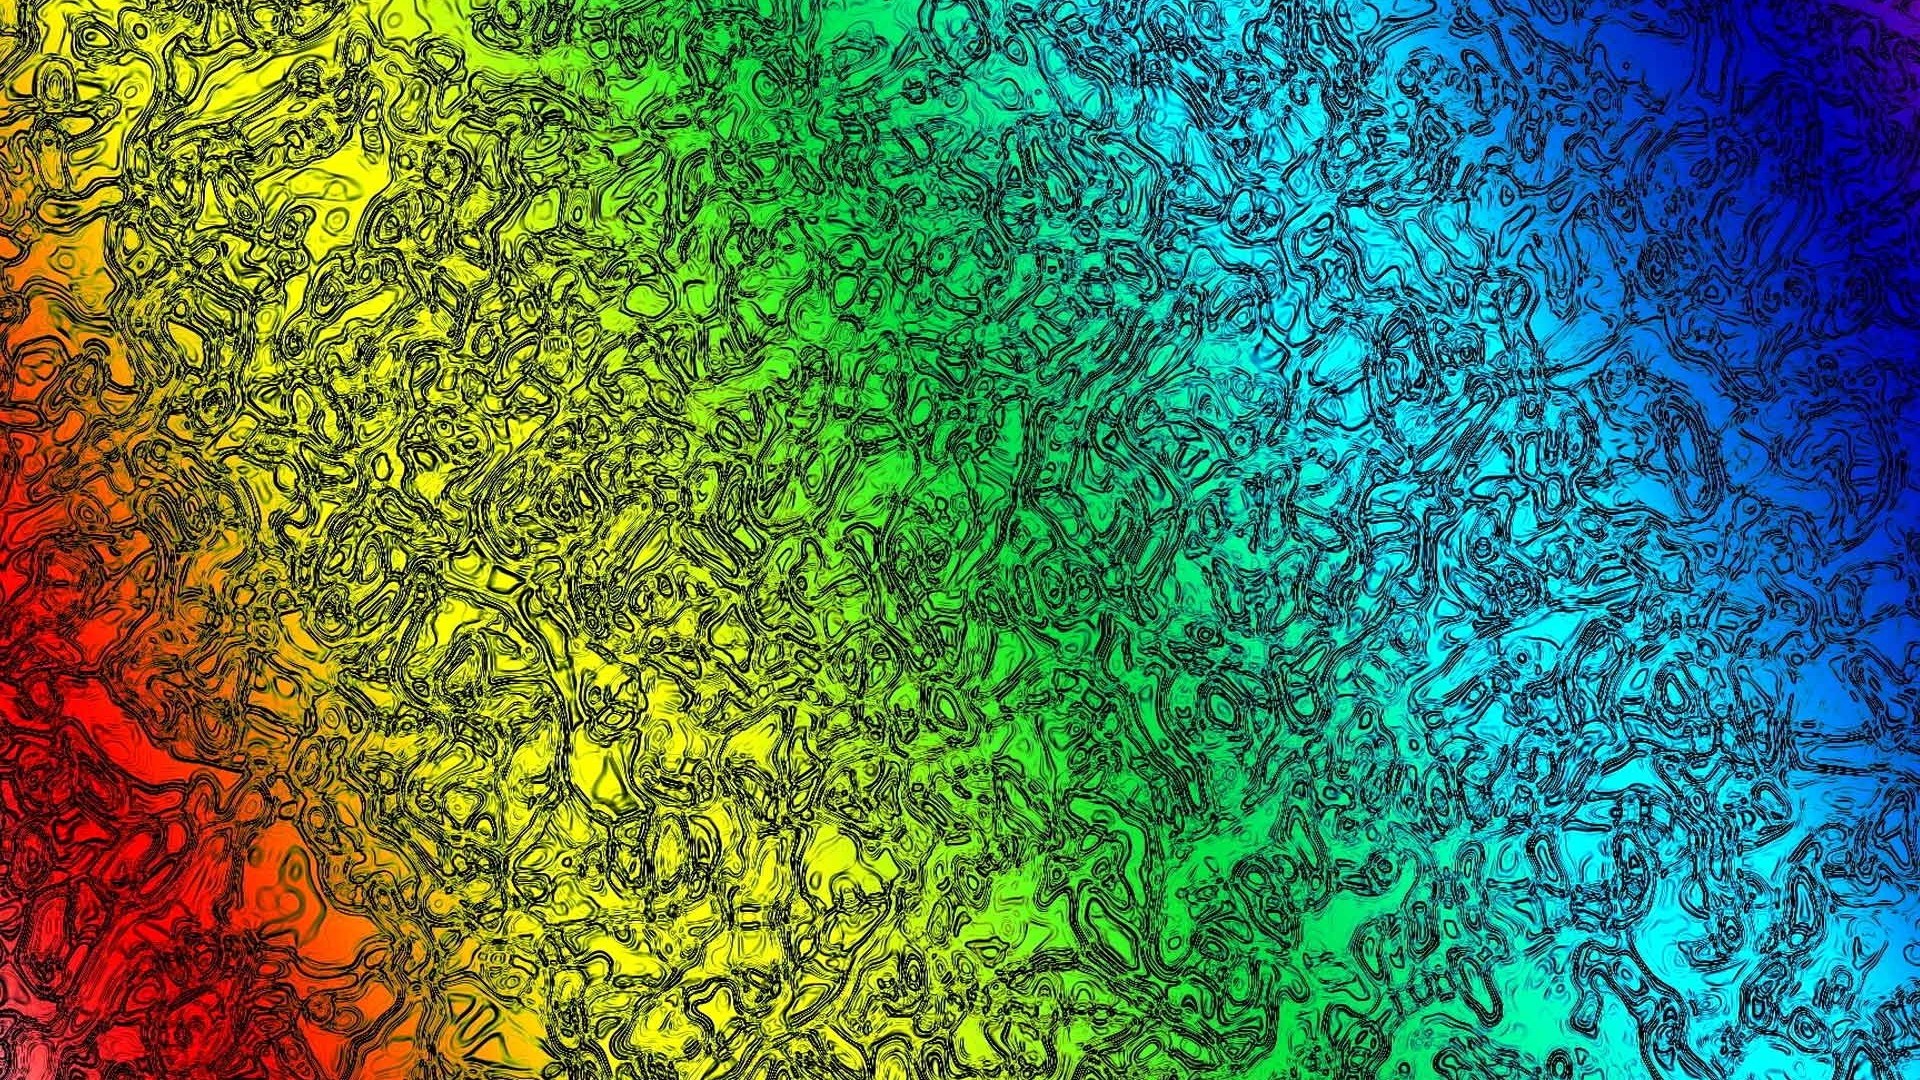 Rainbow Colors Wallpaper with image resolution 1920x1080 pixel. You can use this wallpaper as background for your desktop Computer Screensavers, Android or iPhone smartphones